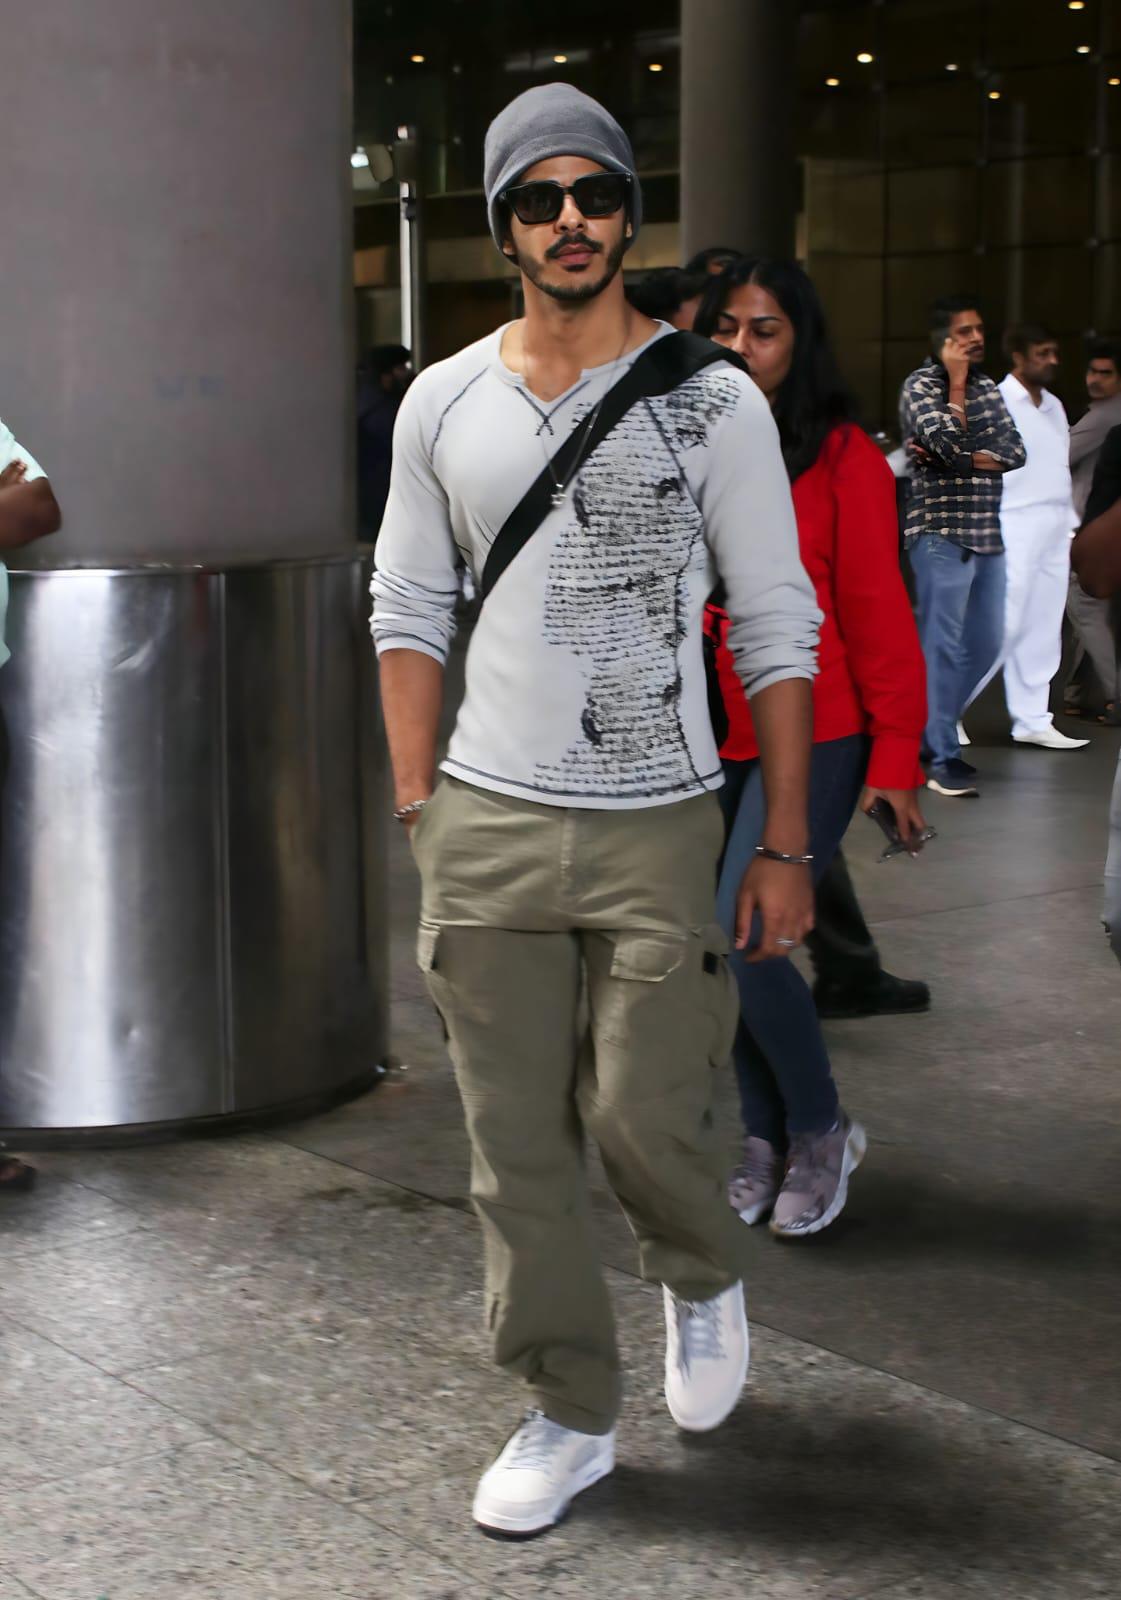 Witness Bollywood's rising star, Ishaan Khatter, as he brings his infectious energy and charismatic persona to the airport